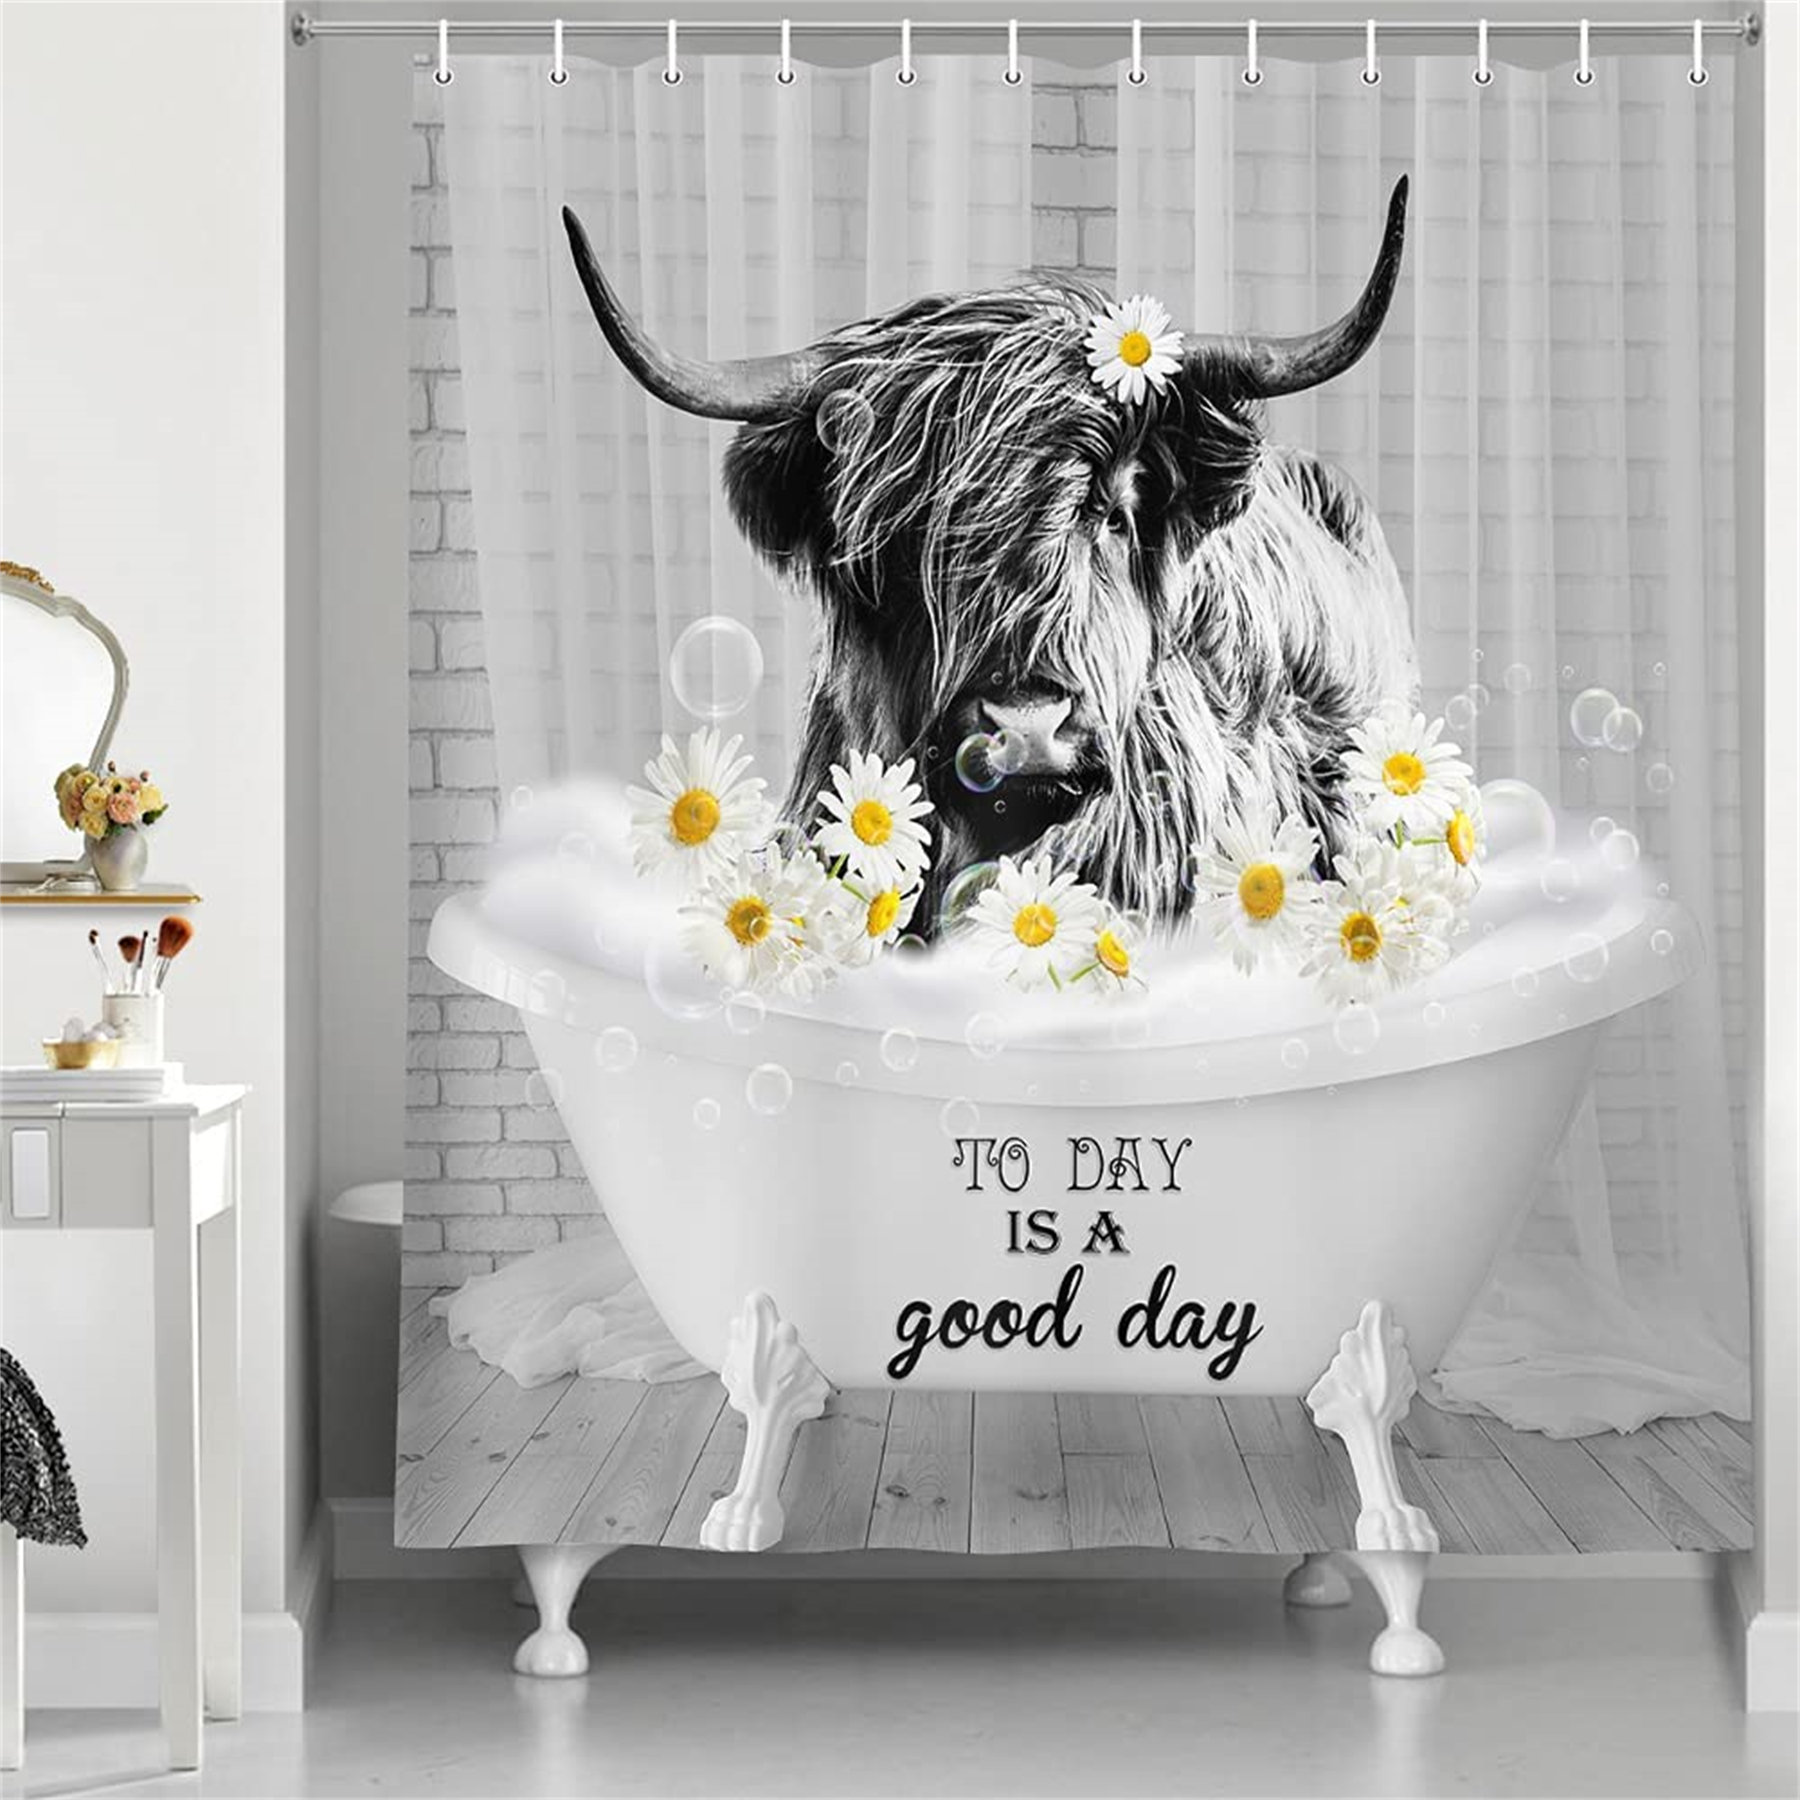 Watercolor Cow with Flowers Bathroom Decor Shower Curtain Set Waterproof Fabric 